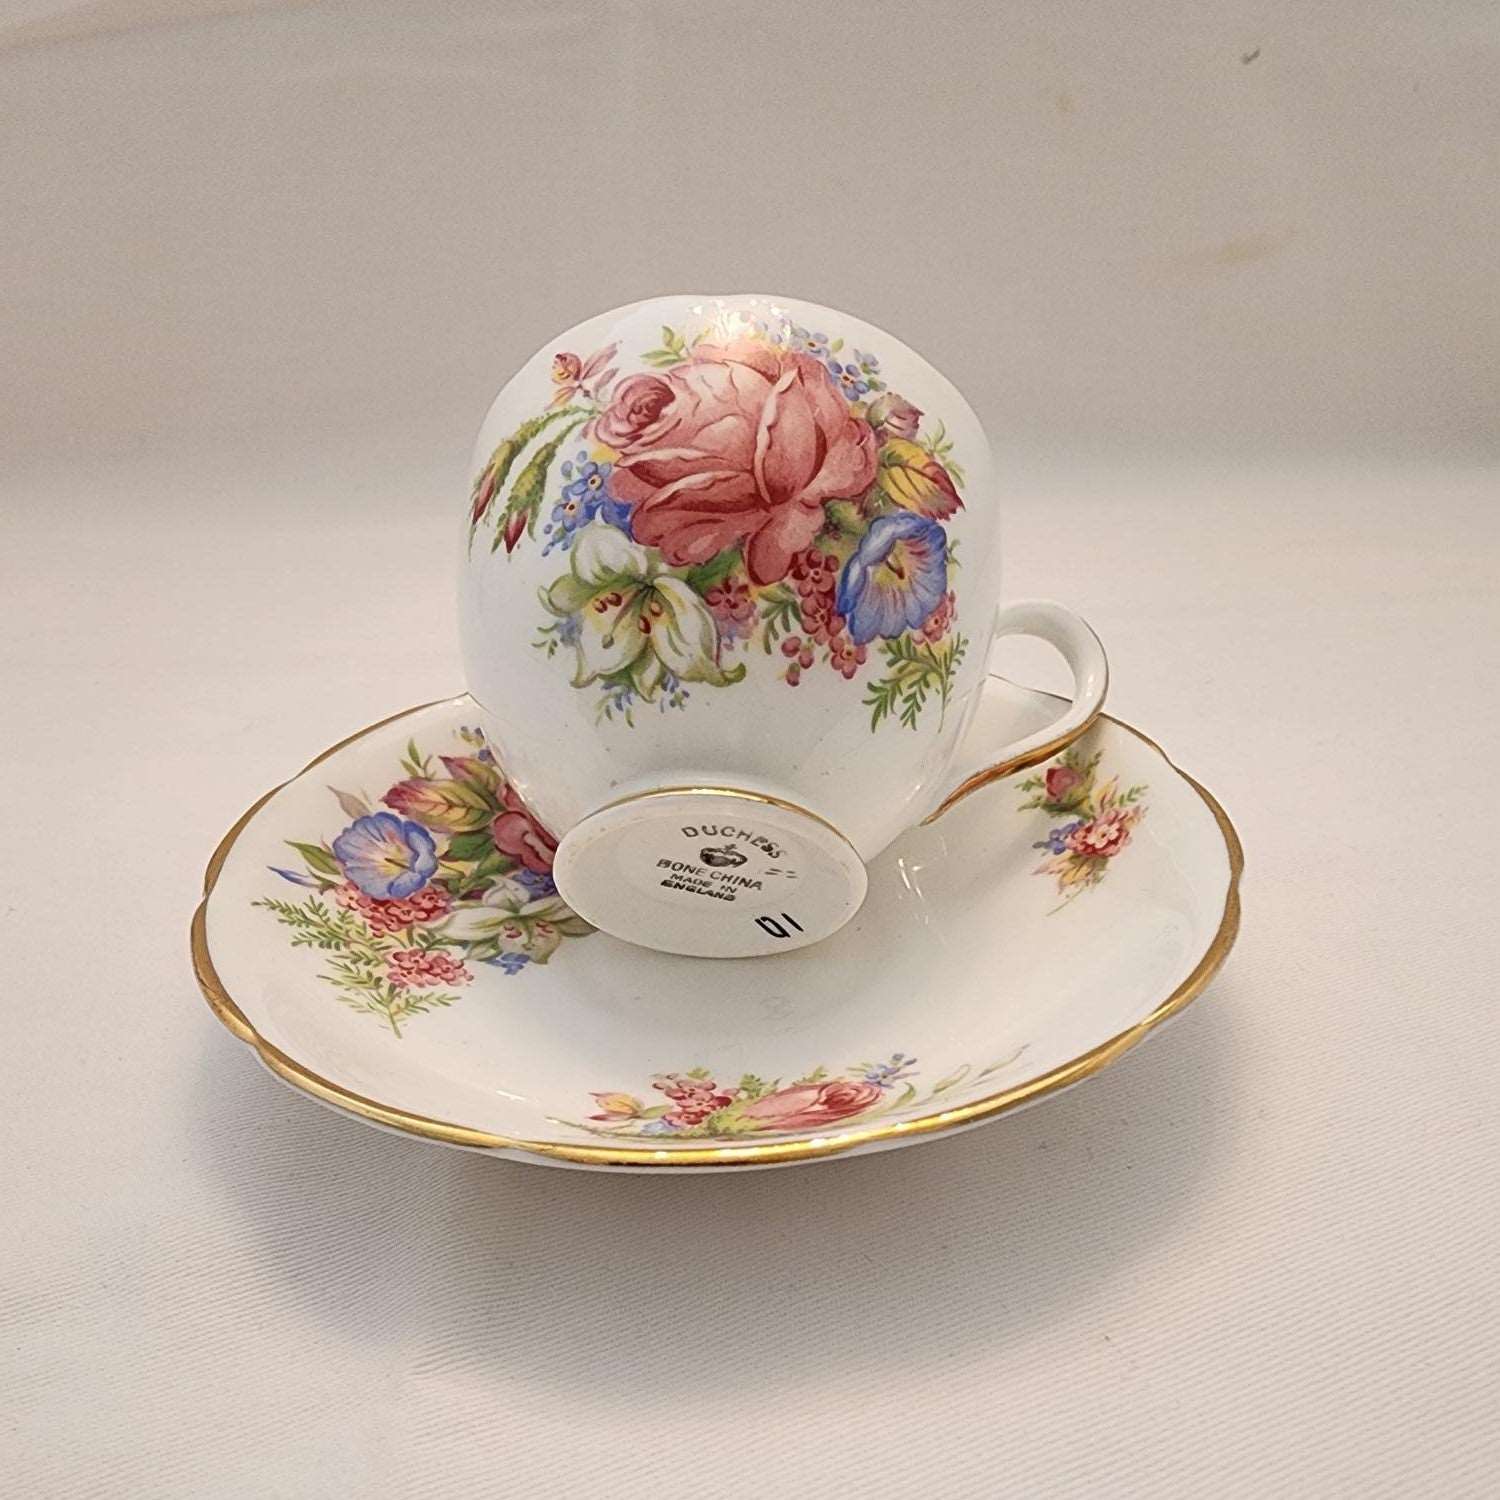 Vintage Duchess Tea Cup and Saucer